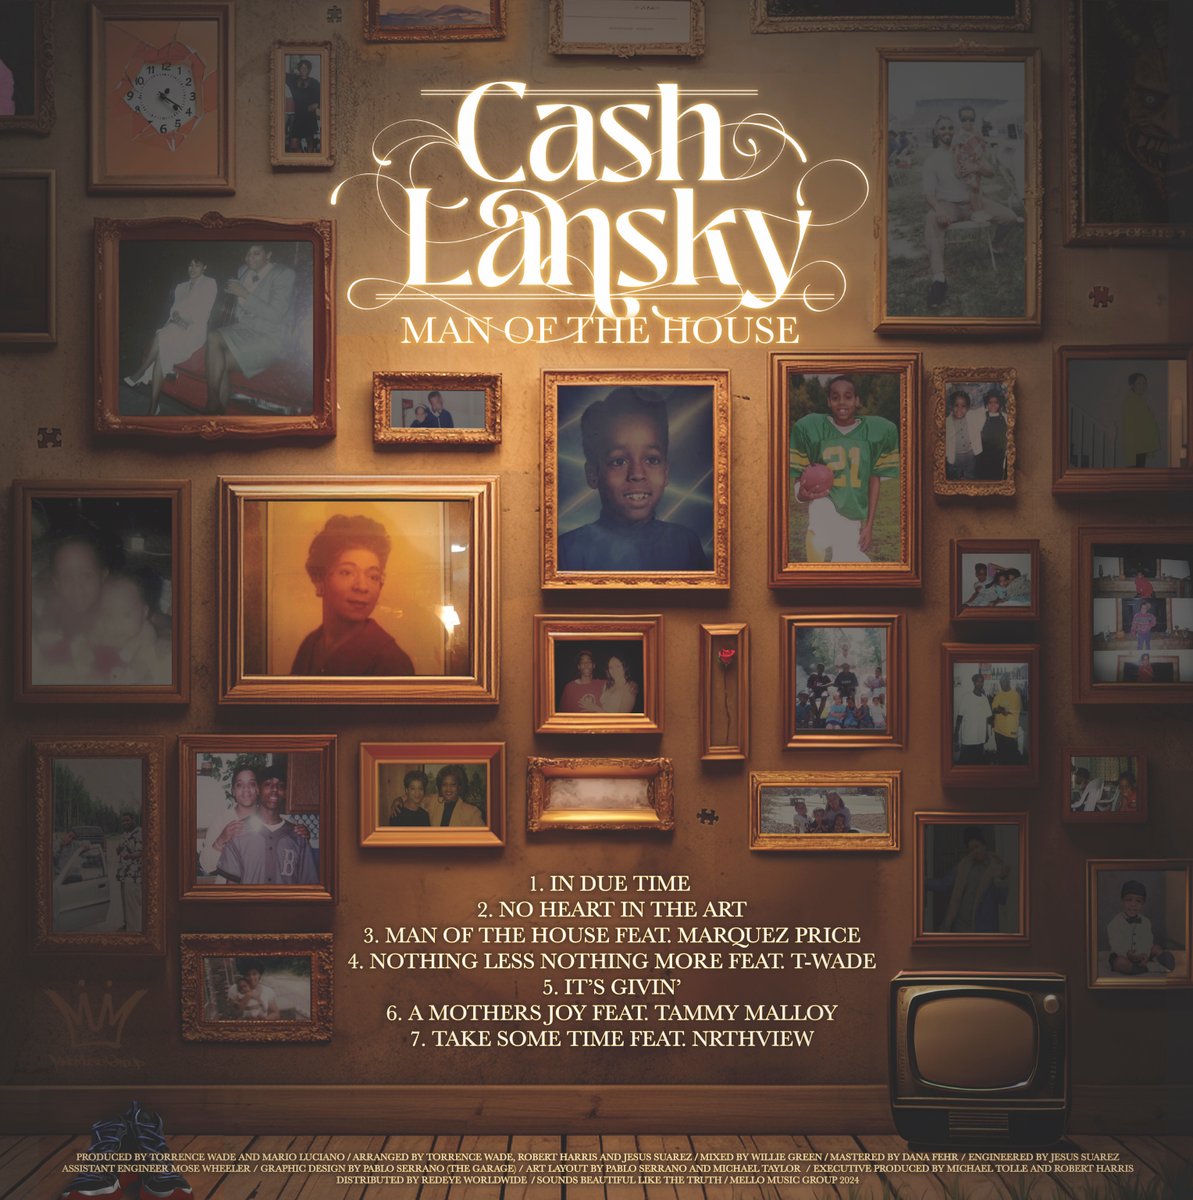 On Friday, @CashLansky dropped his new project 'Man of the House' ---> ow.ly/F6AJ50Rt2ye Heartfelt record by one the Southwest's best mcs. Production by T-Wade & Mario Luciano